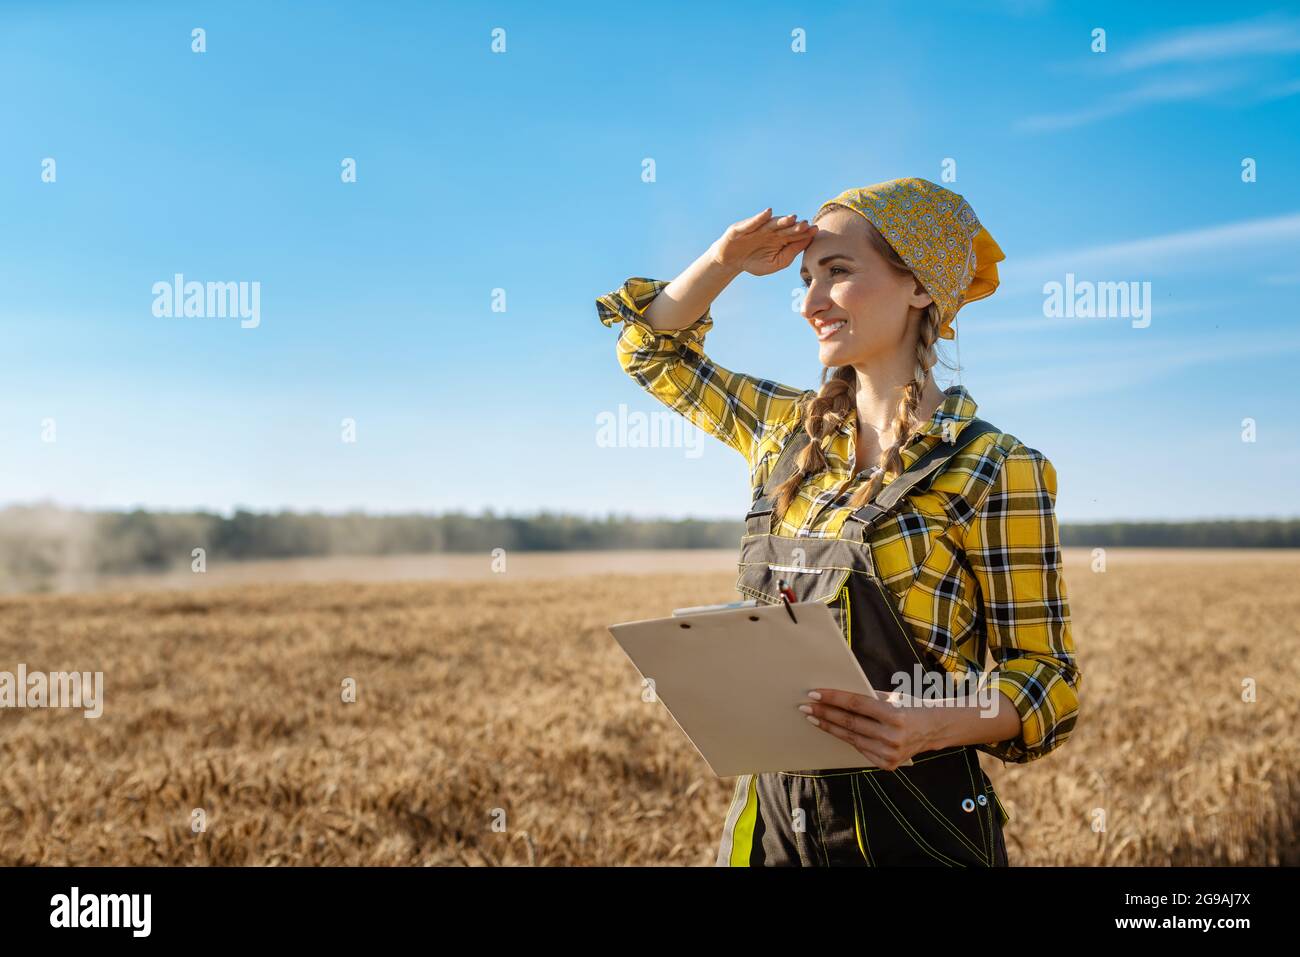 Farmer woman standing on grain field to be harvested Stock Photo